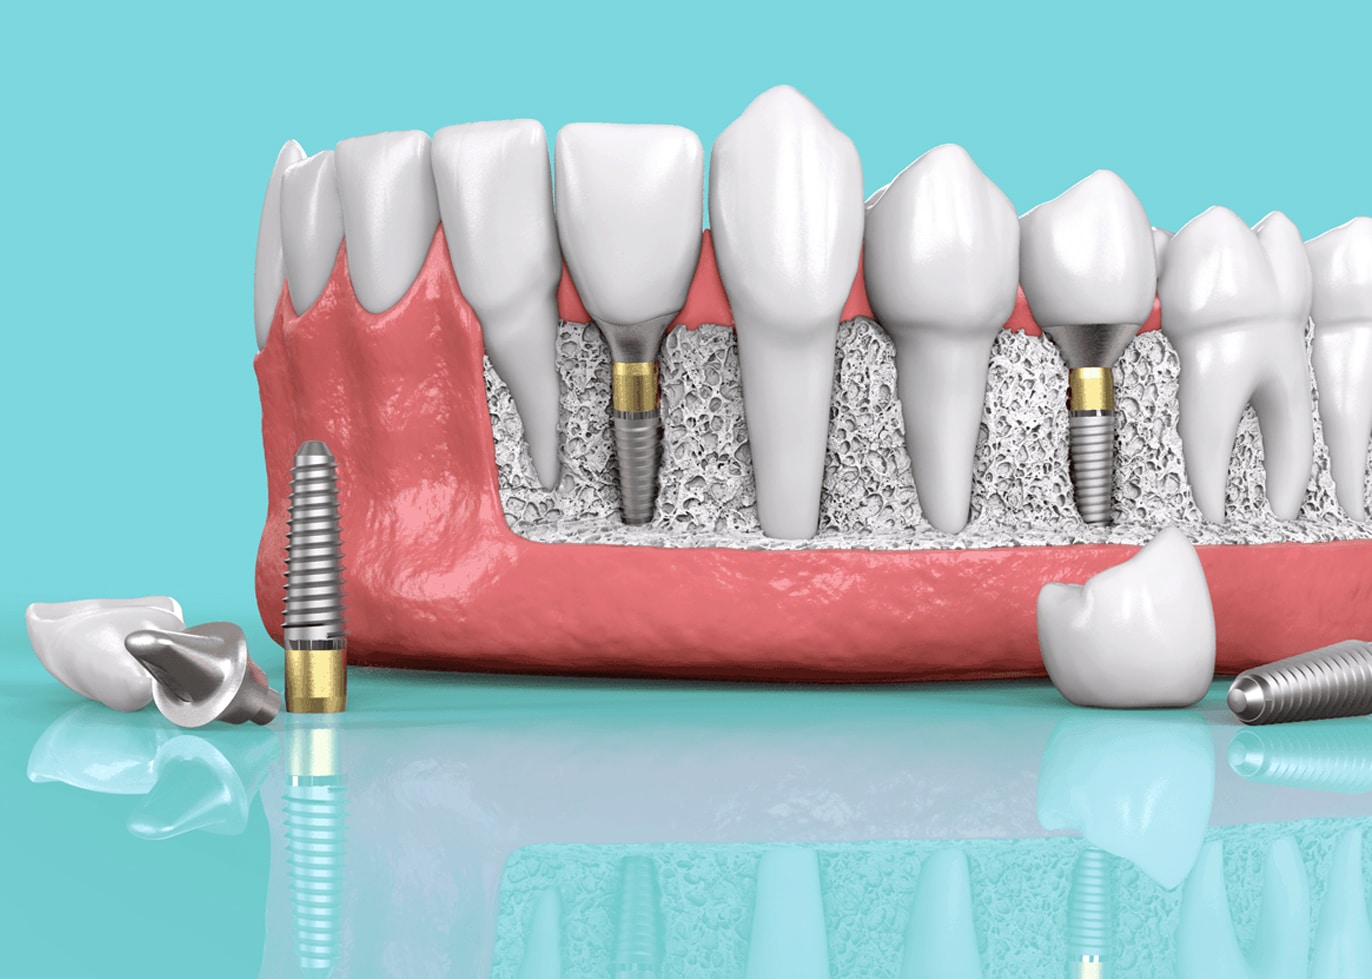 Dental implant procedure featuring two-stage or delayed loading technique in individual implant cases.